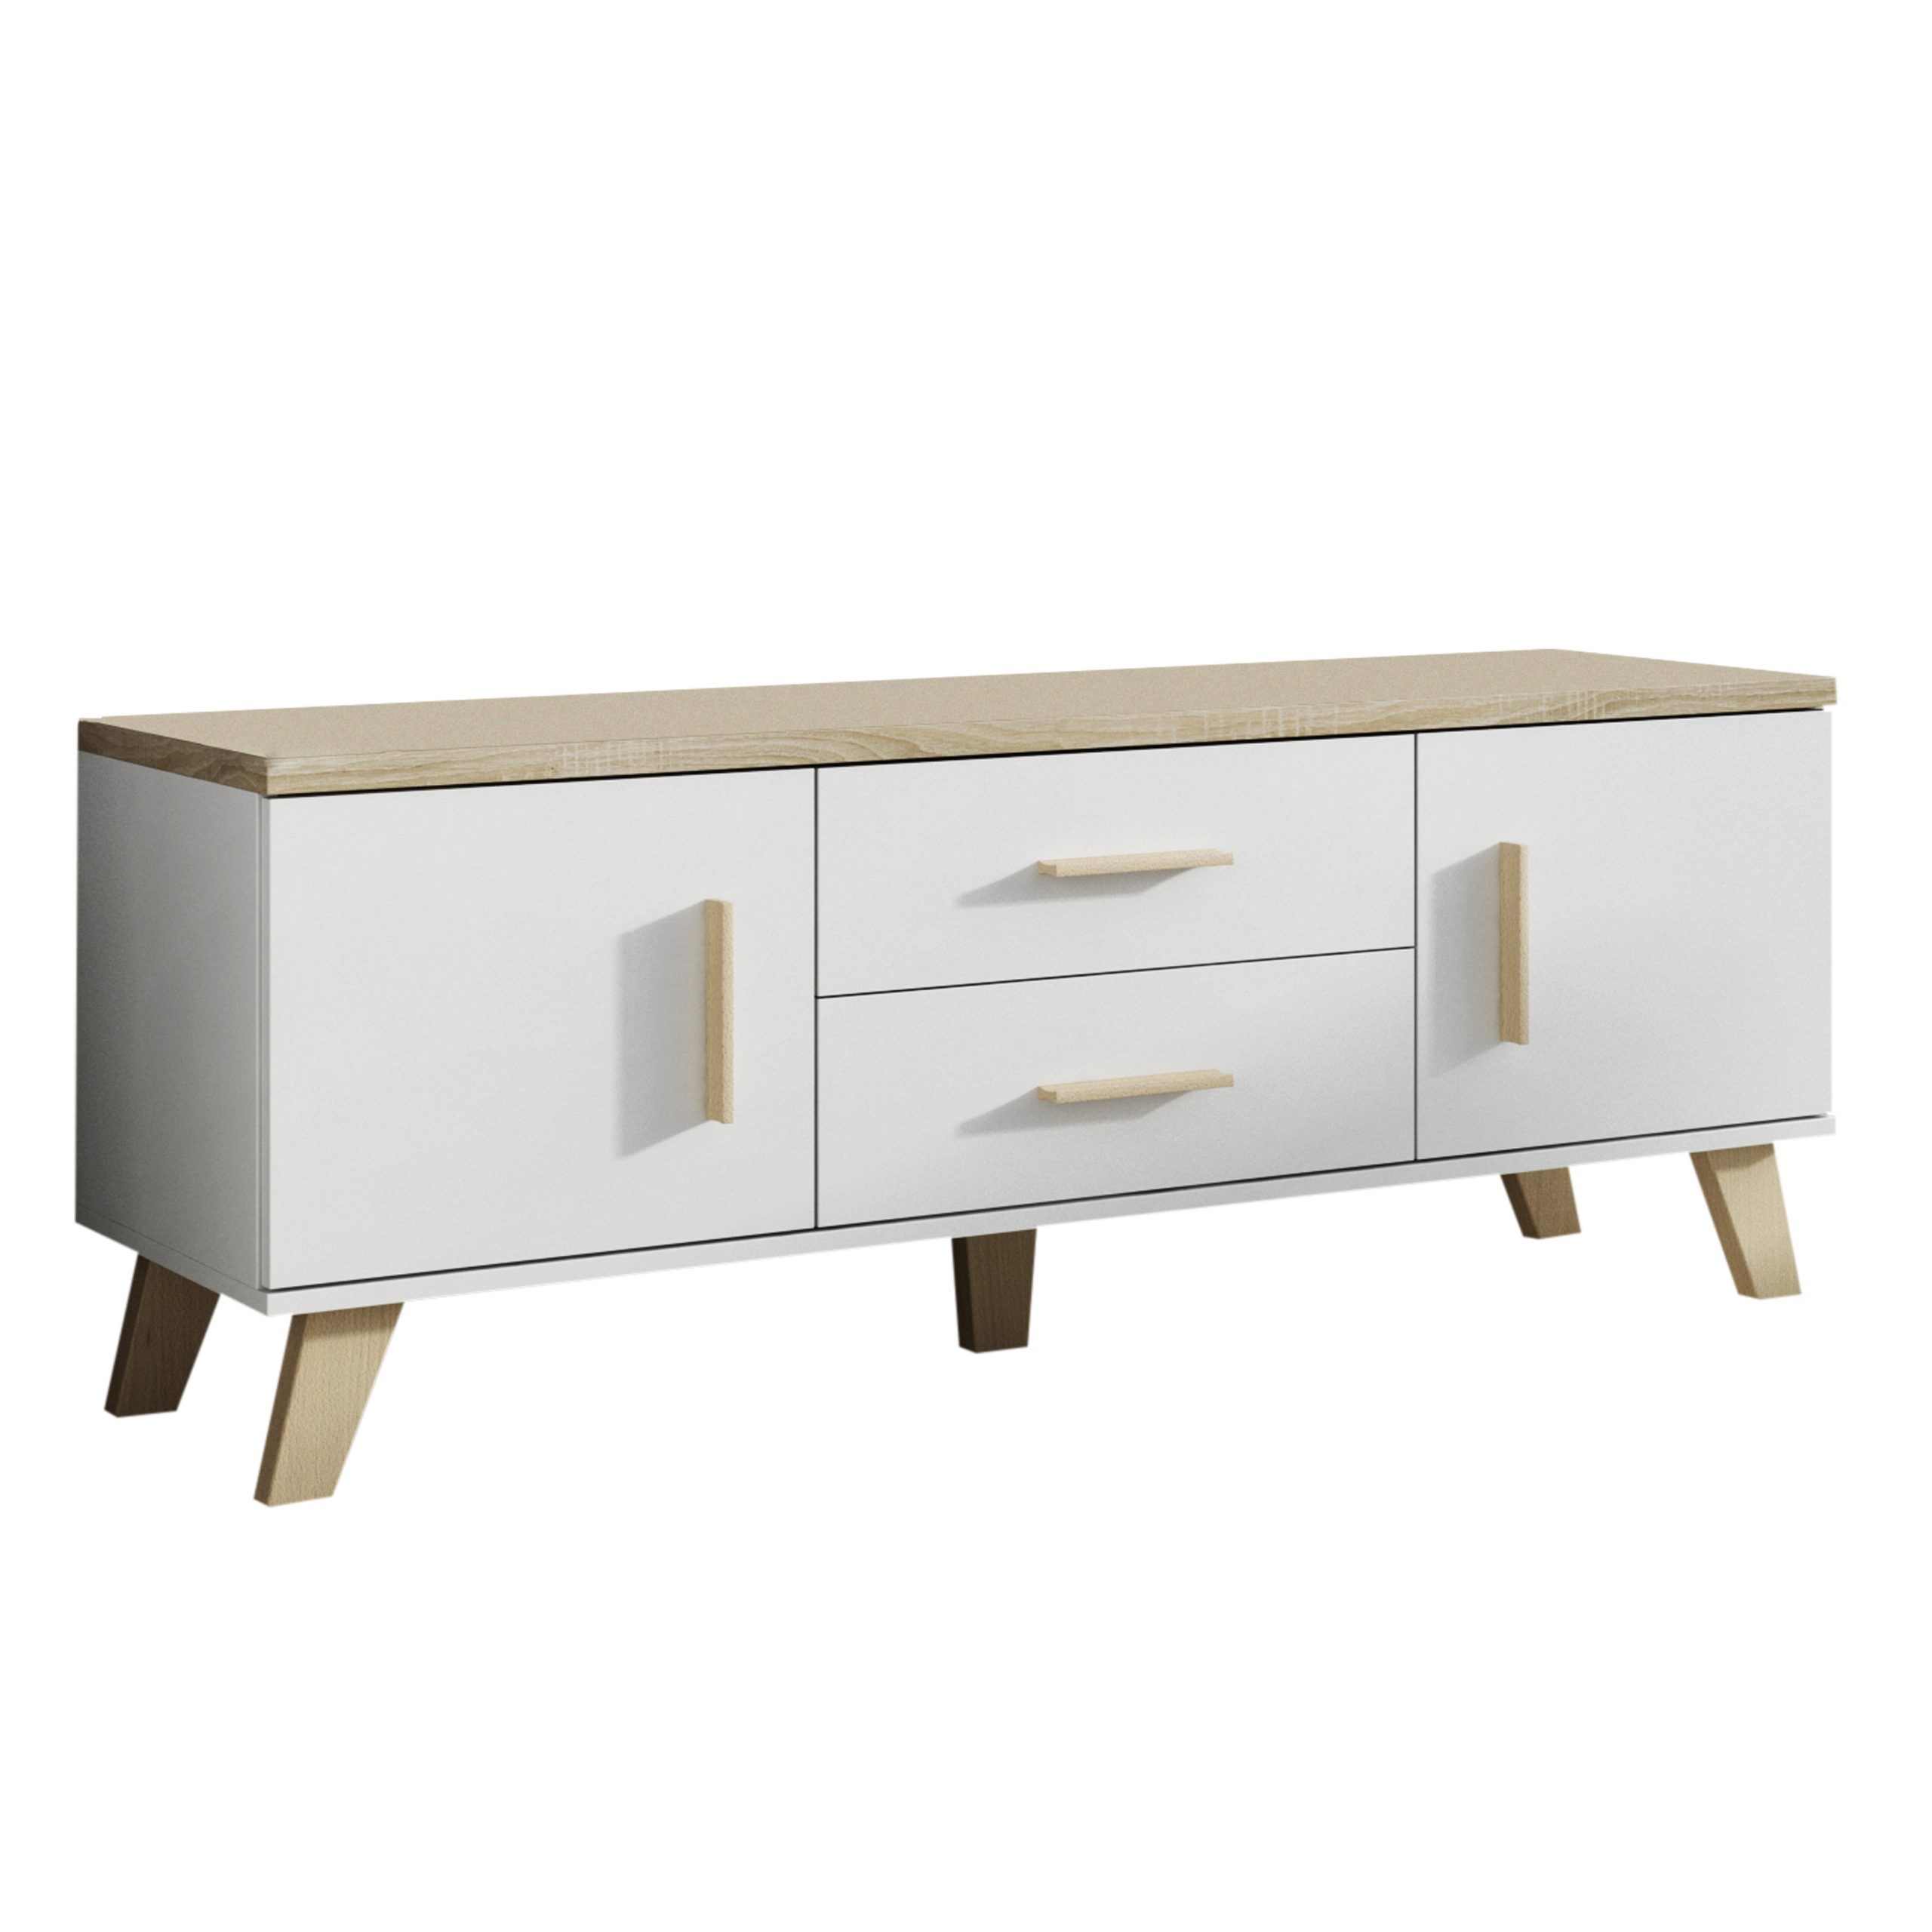 Lotta Modern White&wood Tv Stand Small 55" For Up To 65"tv Inside White Wood Tv Stands (View 12 of 15)